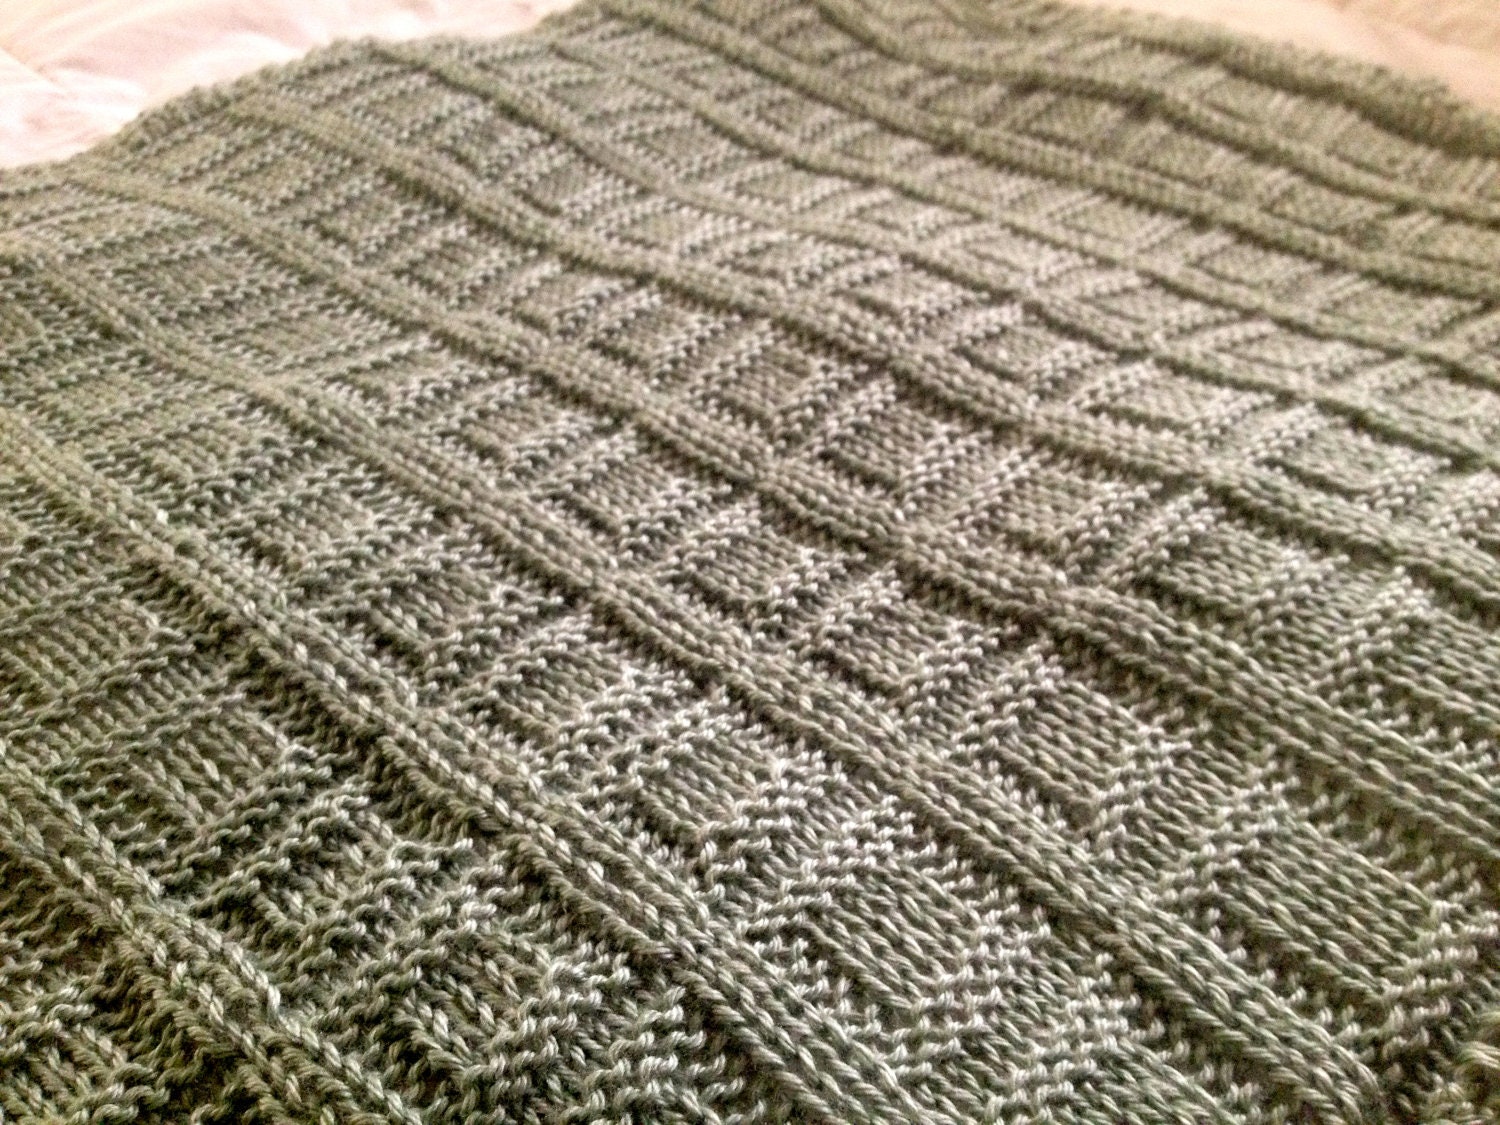 Hand Knit Baby Blanket Square in a Square pattern with